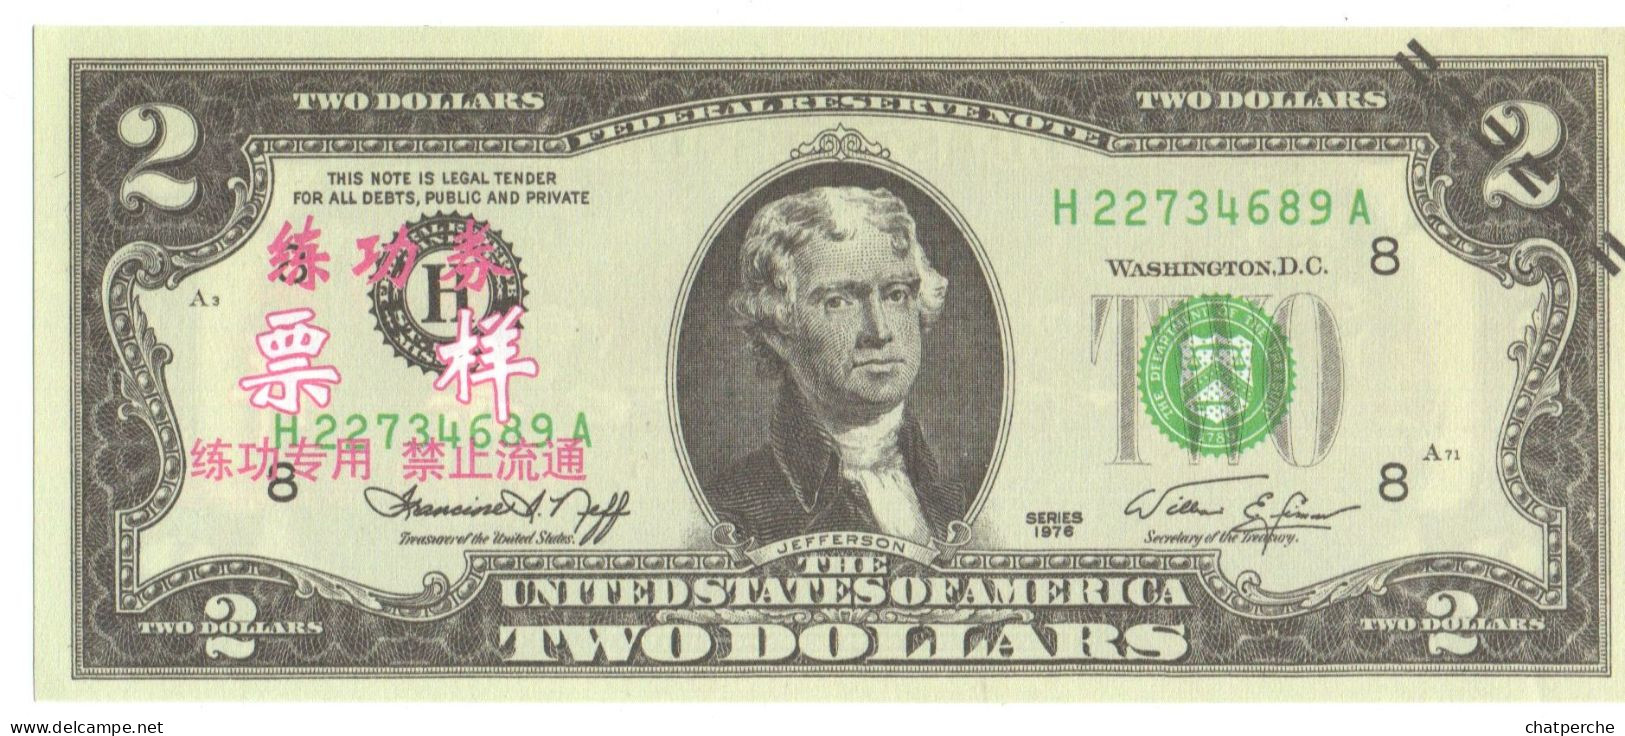 POUR COLLECTIONNEUR FAUX-BILLET FAKE 2 TWO DOLLARS THOMAS JEFFERSON USA THE UNITED STATES OF AMERICA - Errors